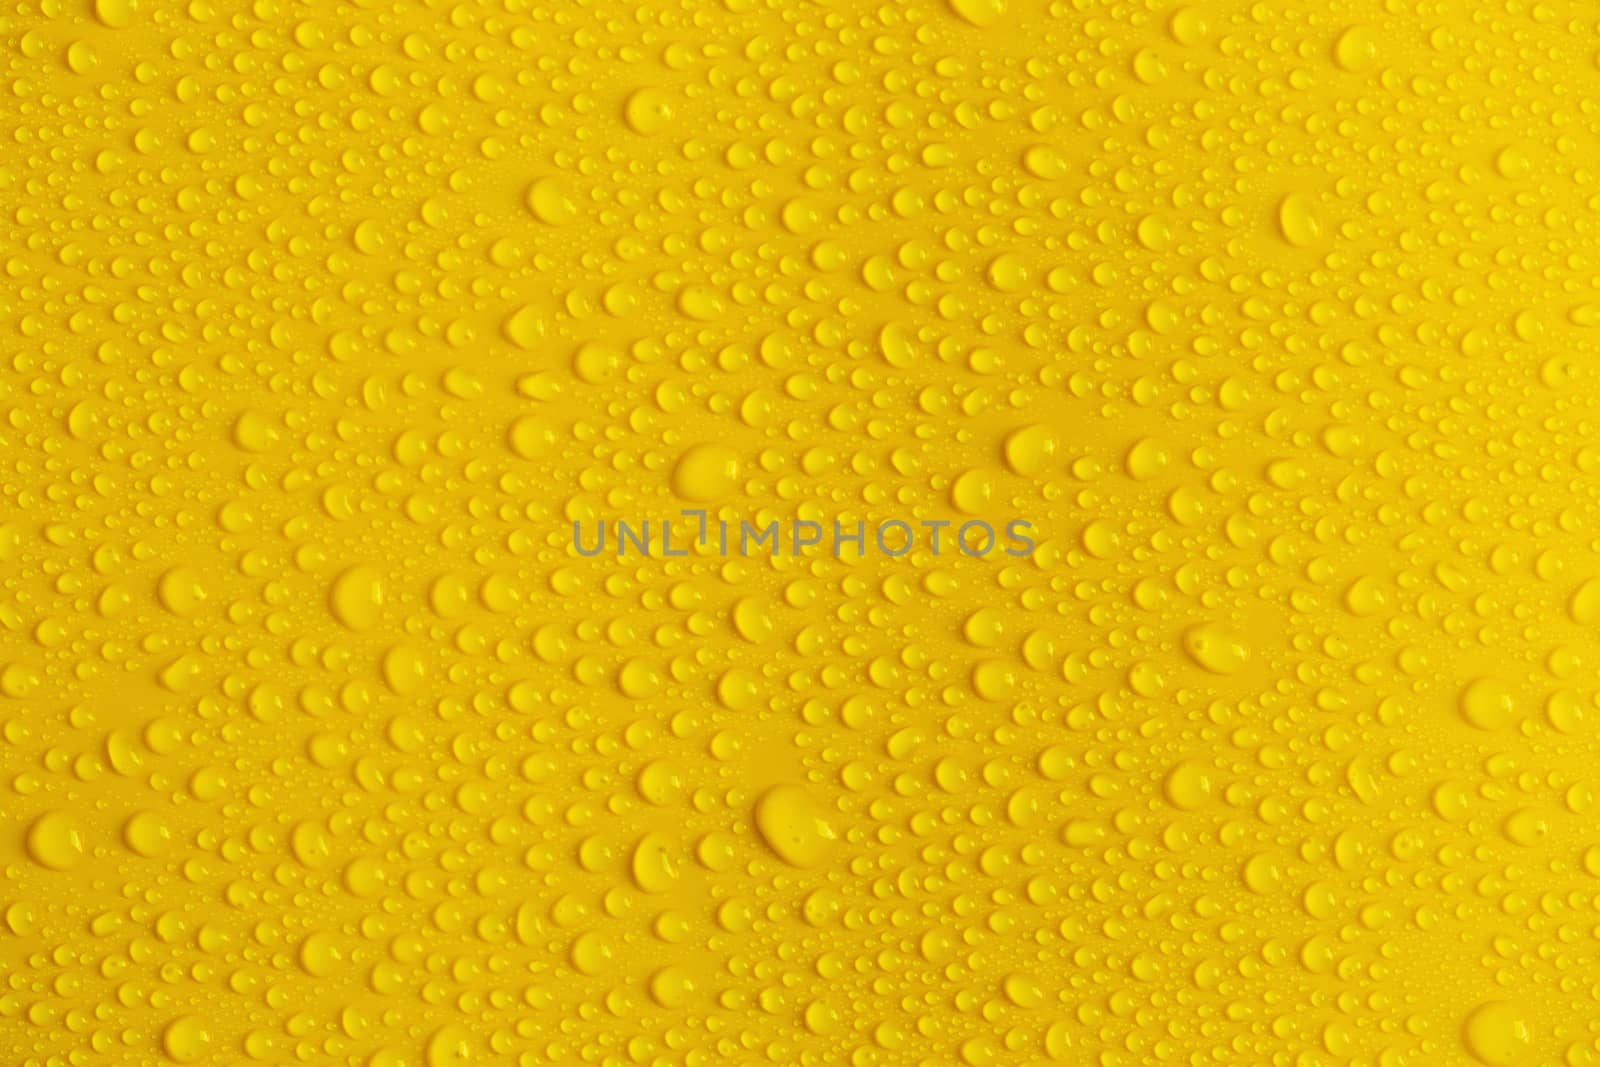 Rain or Water drops on yellow background by kaiskynet